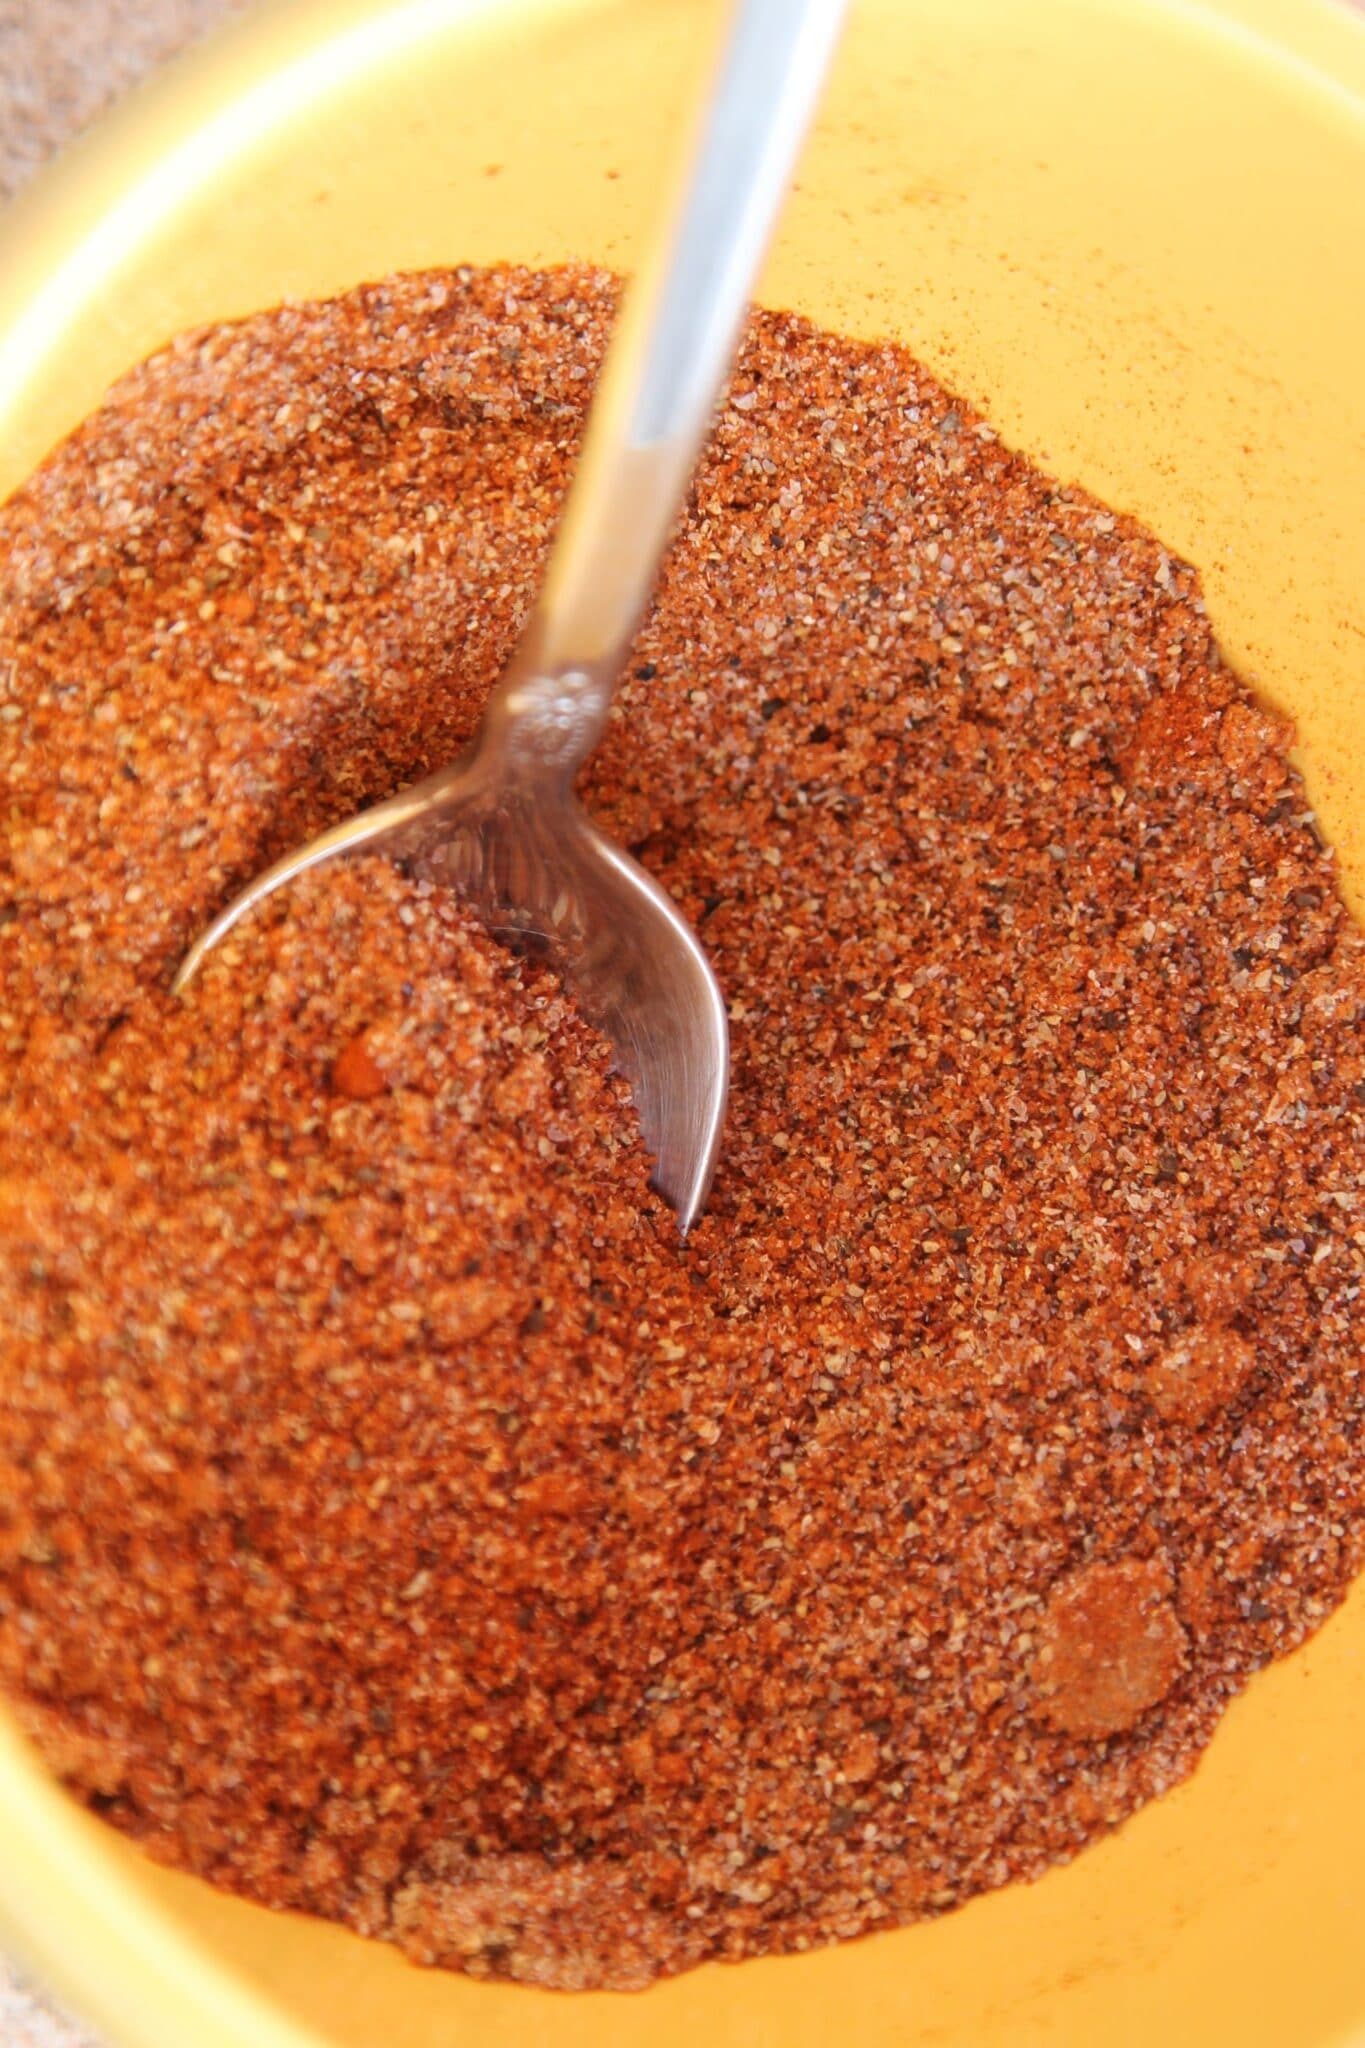 dry rub seasoning in a yellow bowl with a silver spoon